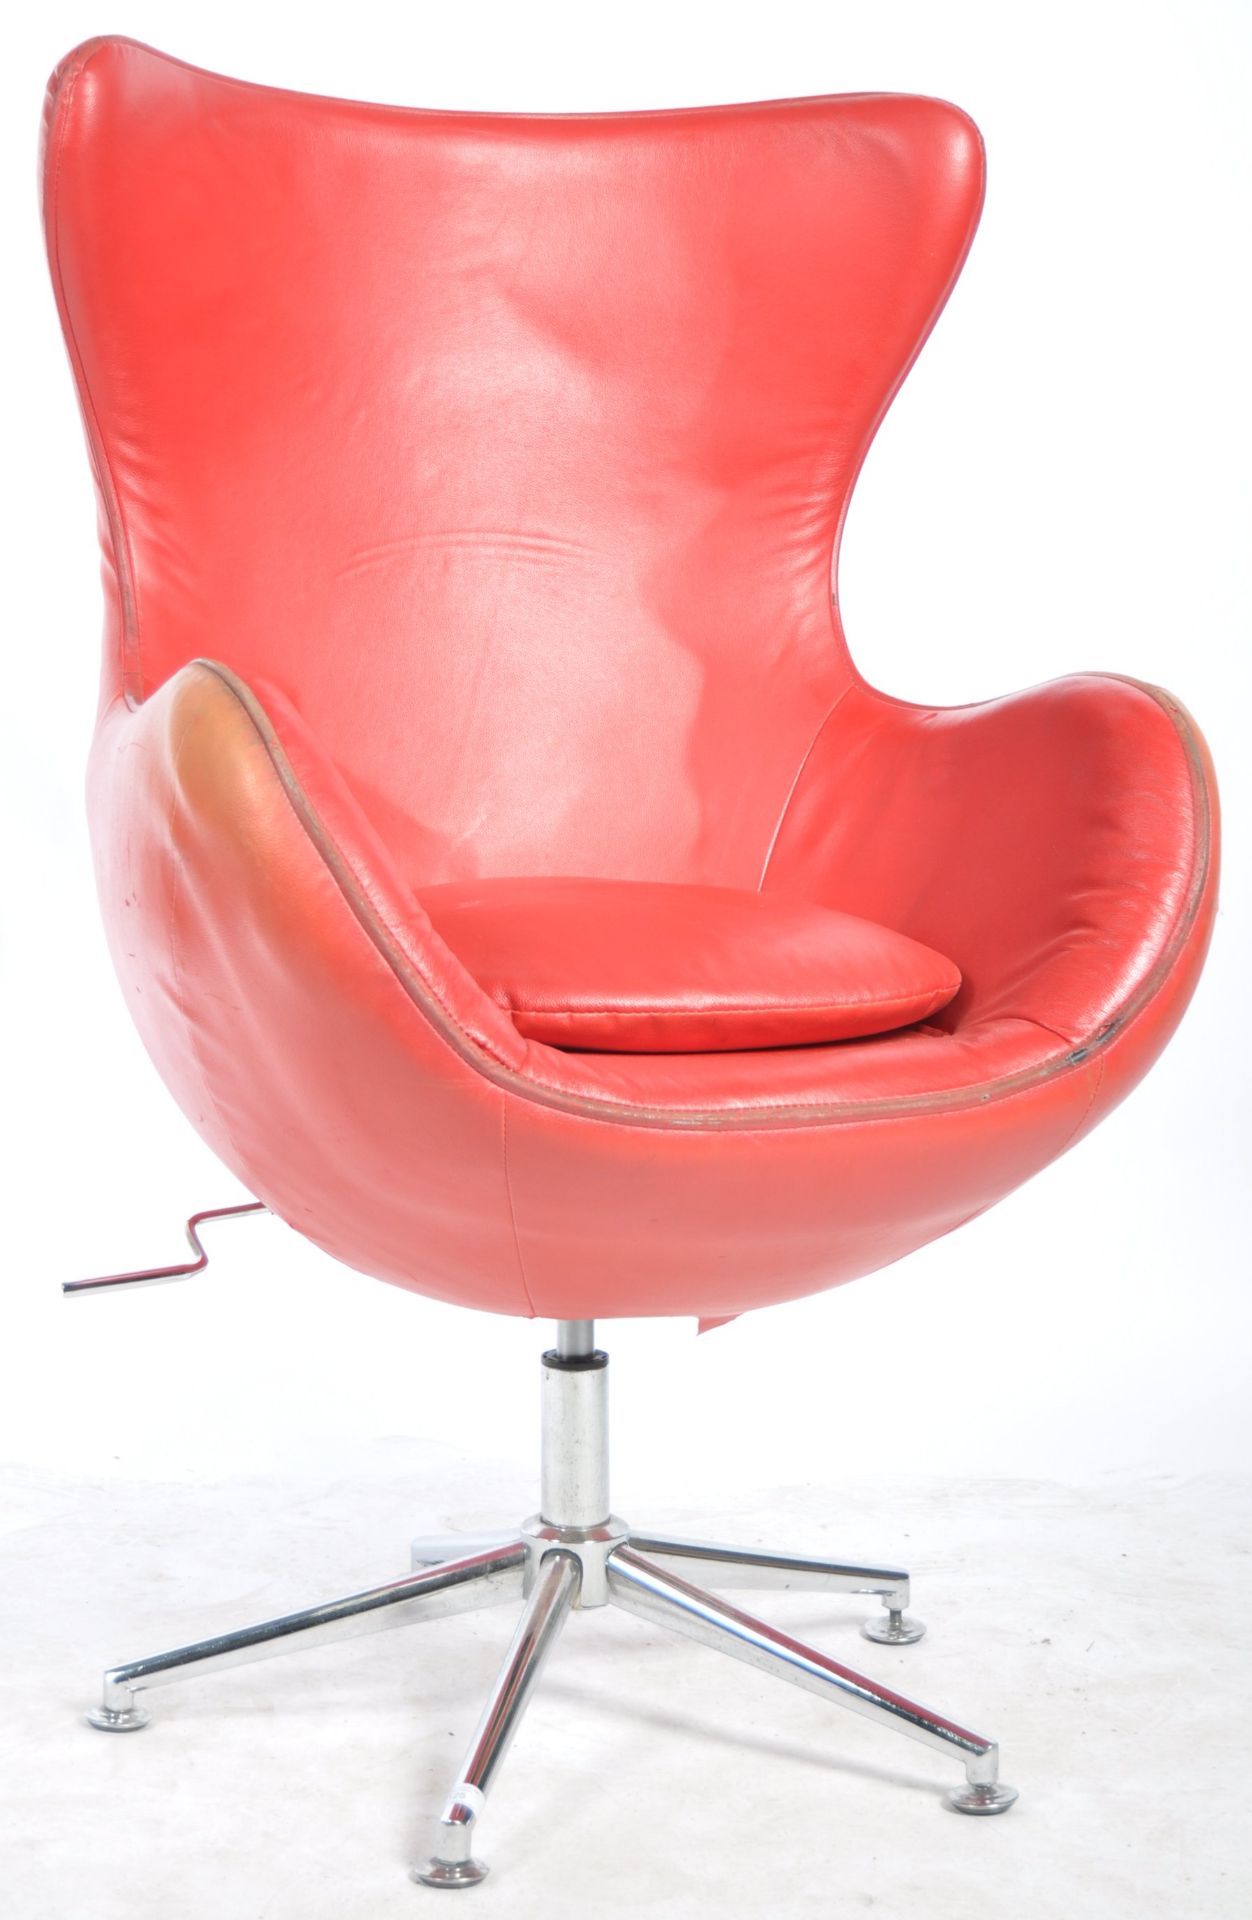 MID CENTURY RED LEATHER AND CHROME SWIVEL EGG CHAIR